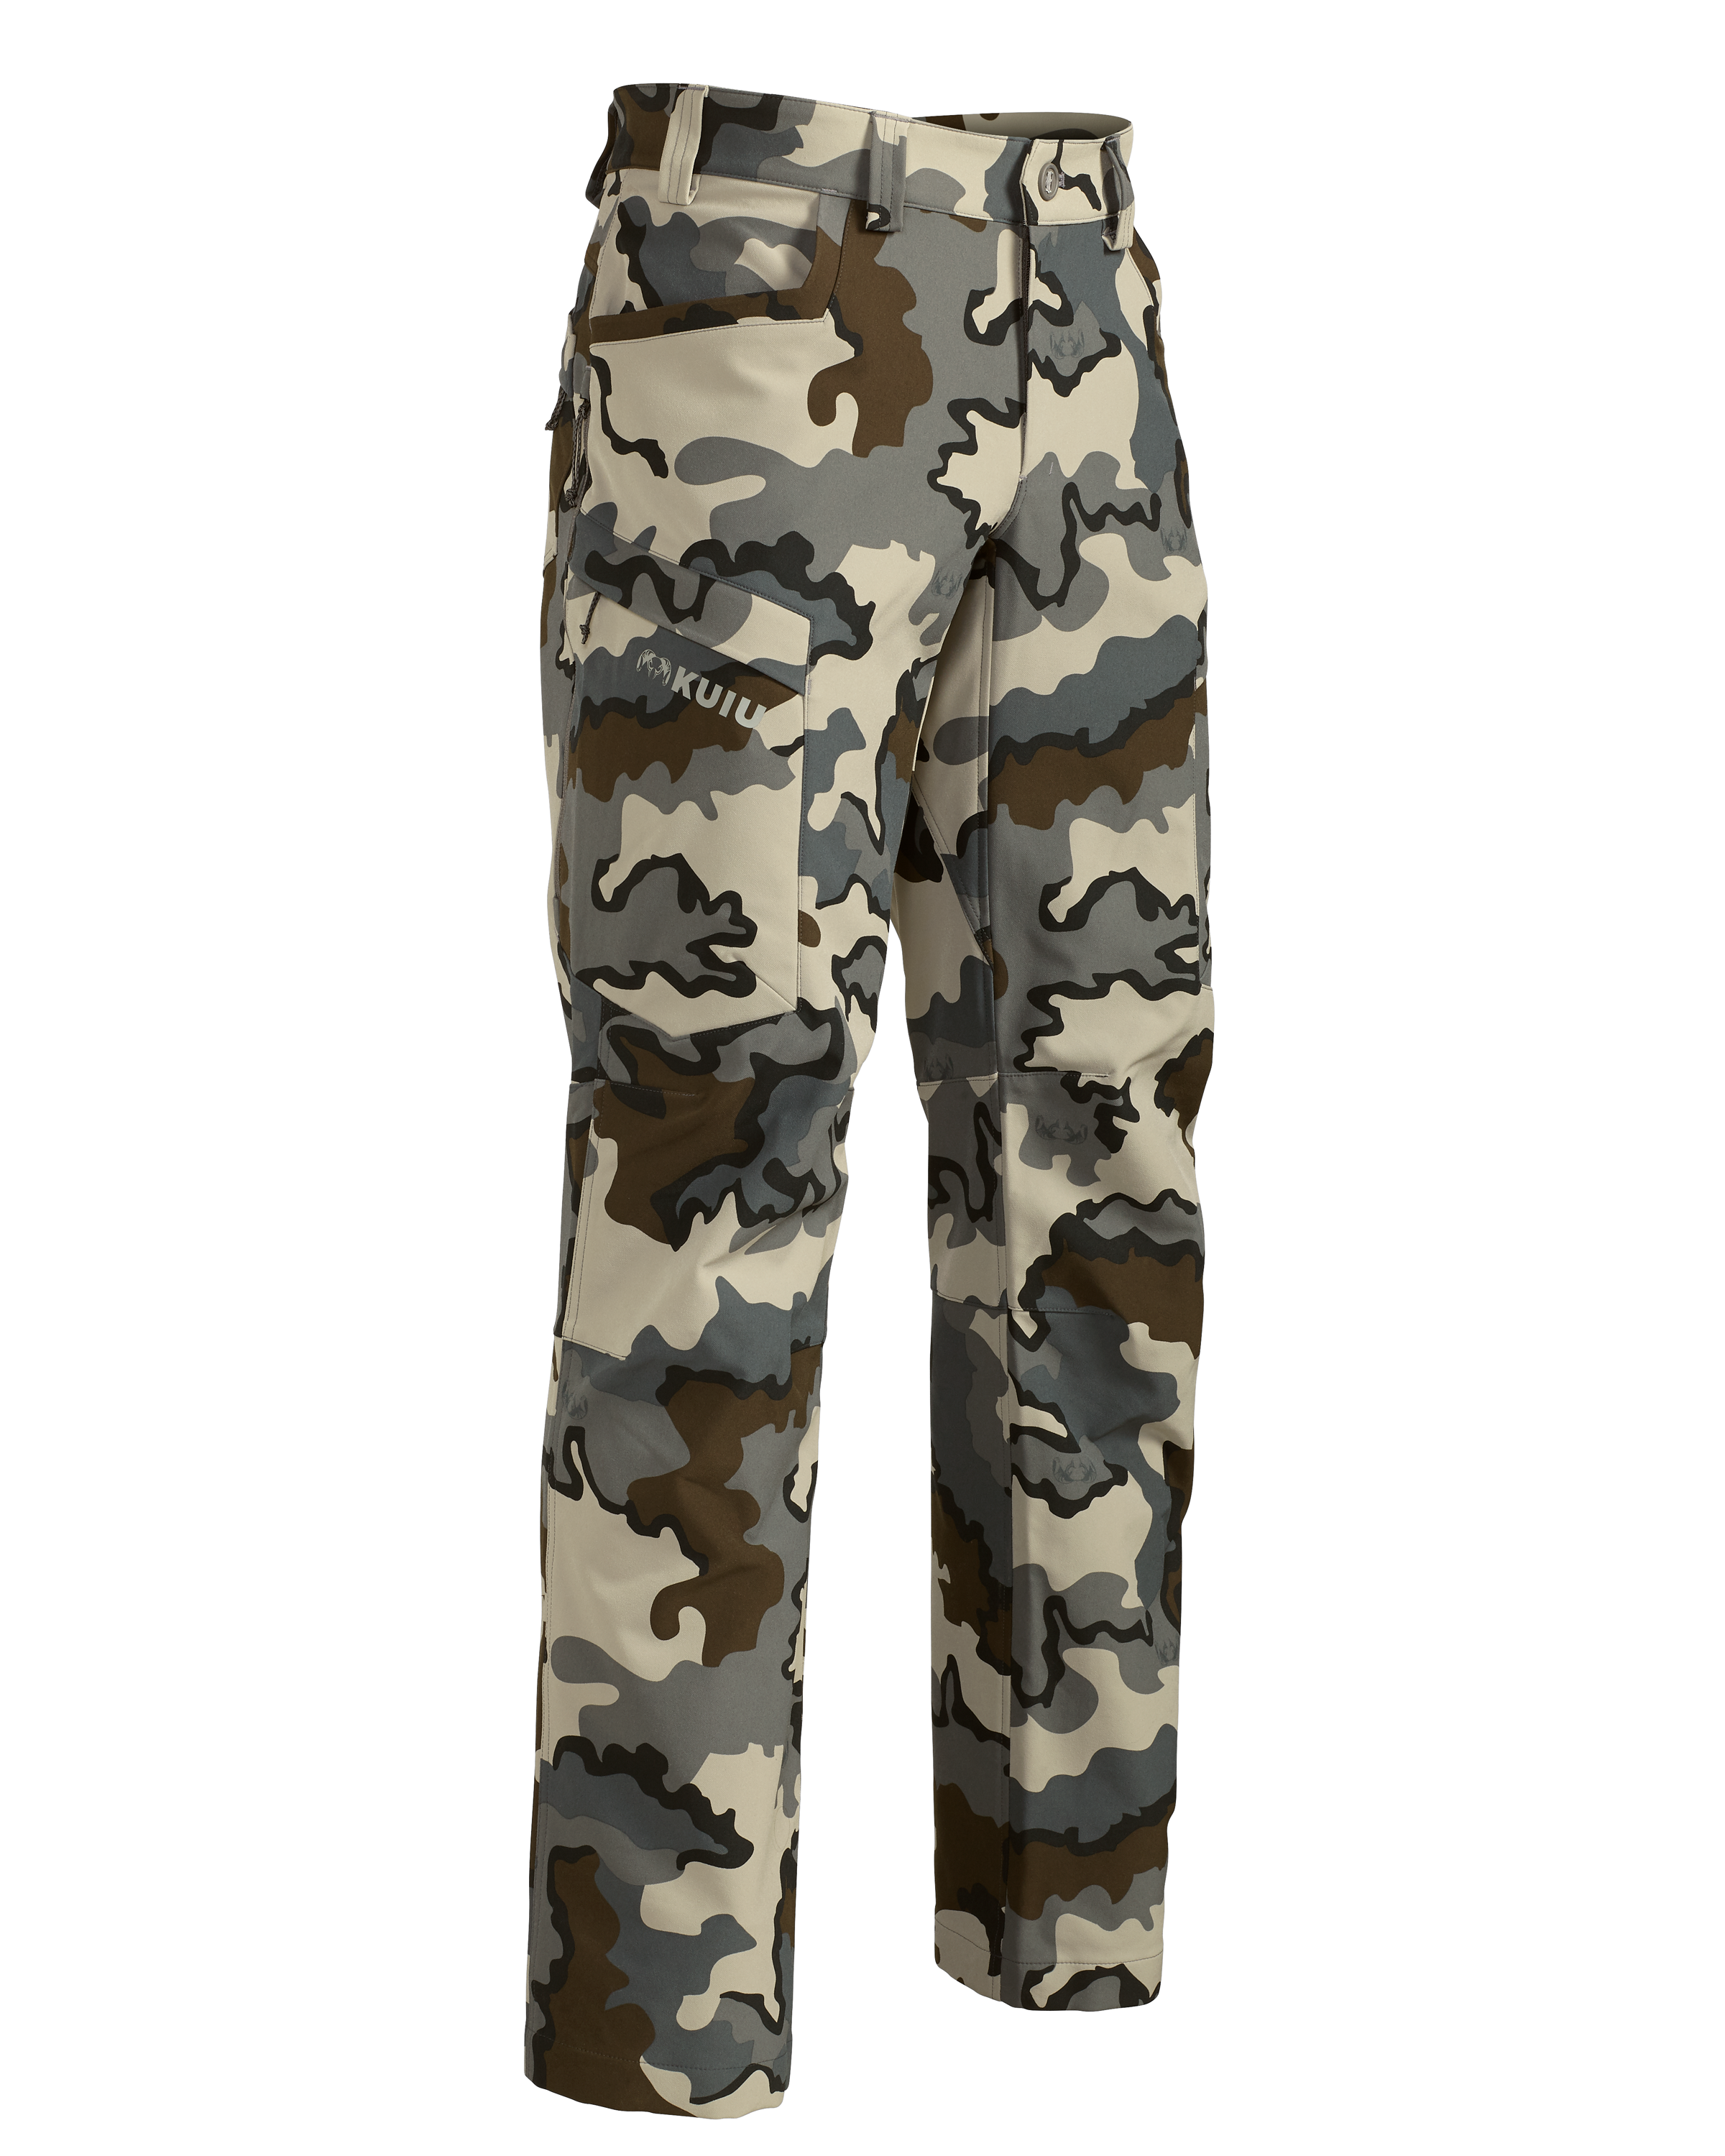 KUIU Attack Hunting Pant in Vias | Size 28